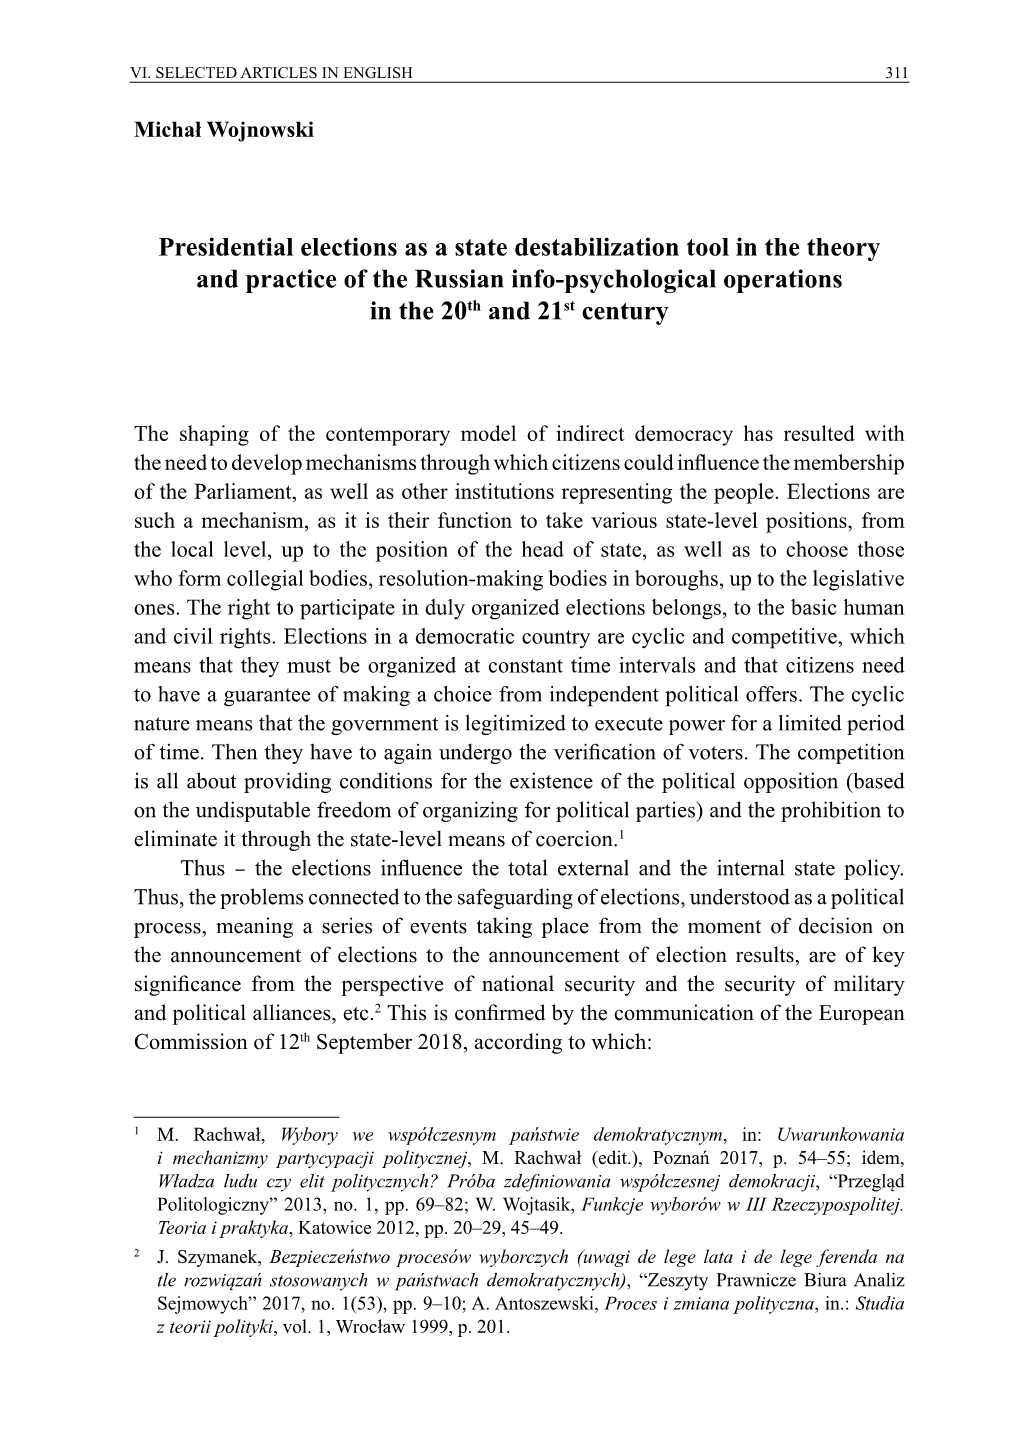 Presidential Elections As a State Destabilization Tool in the Theory and Practice of the Russian Info-Psychological Operations in the 20Th and 21St Century